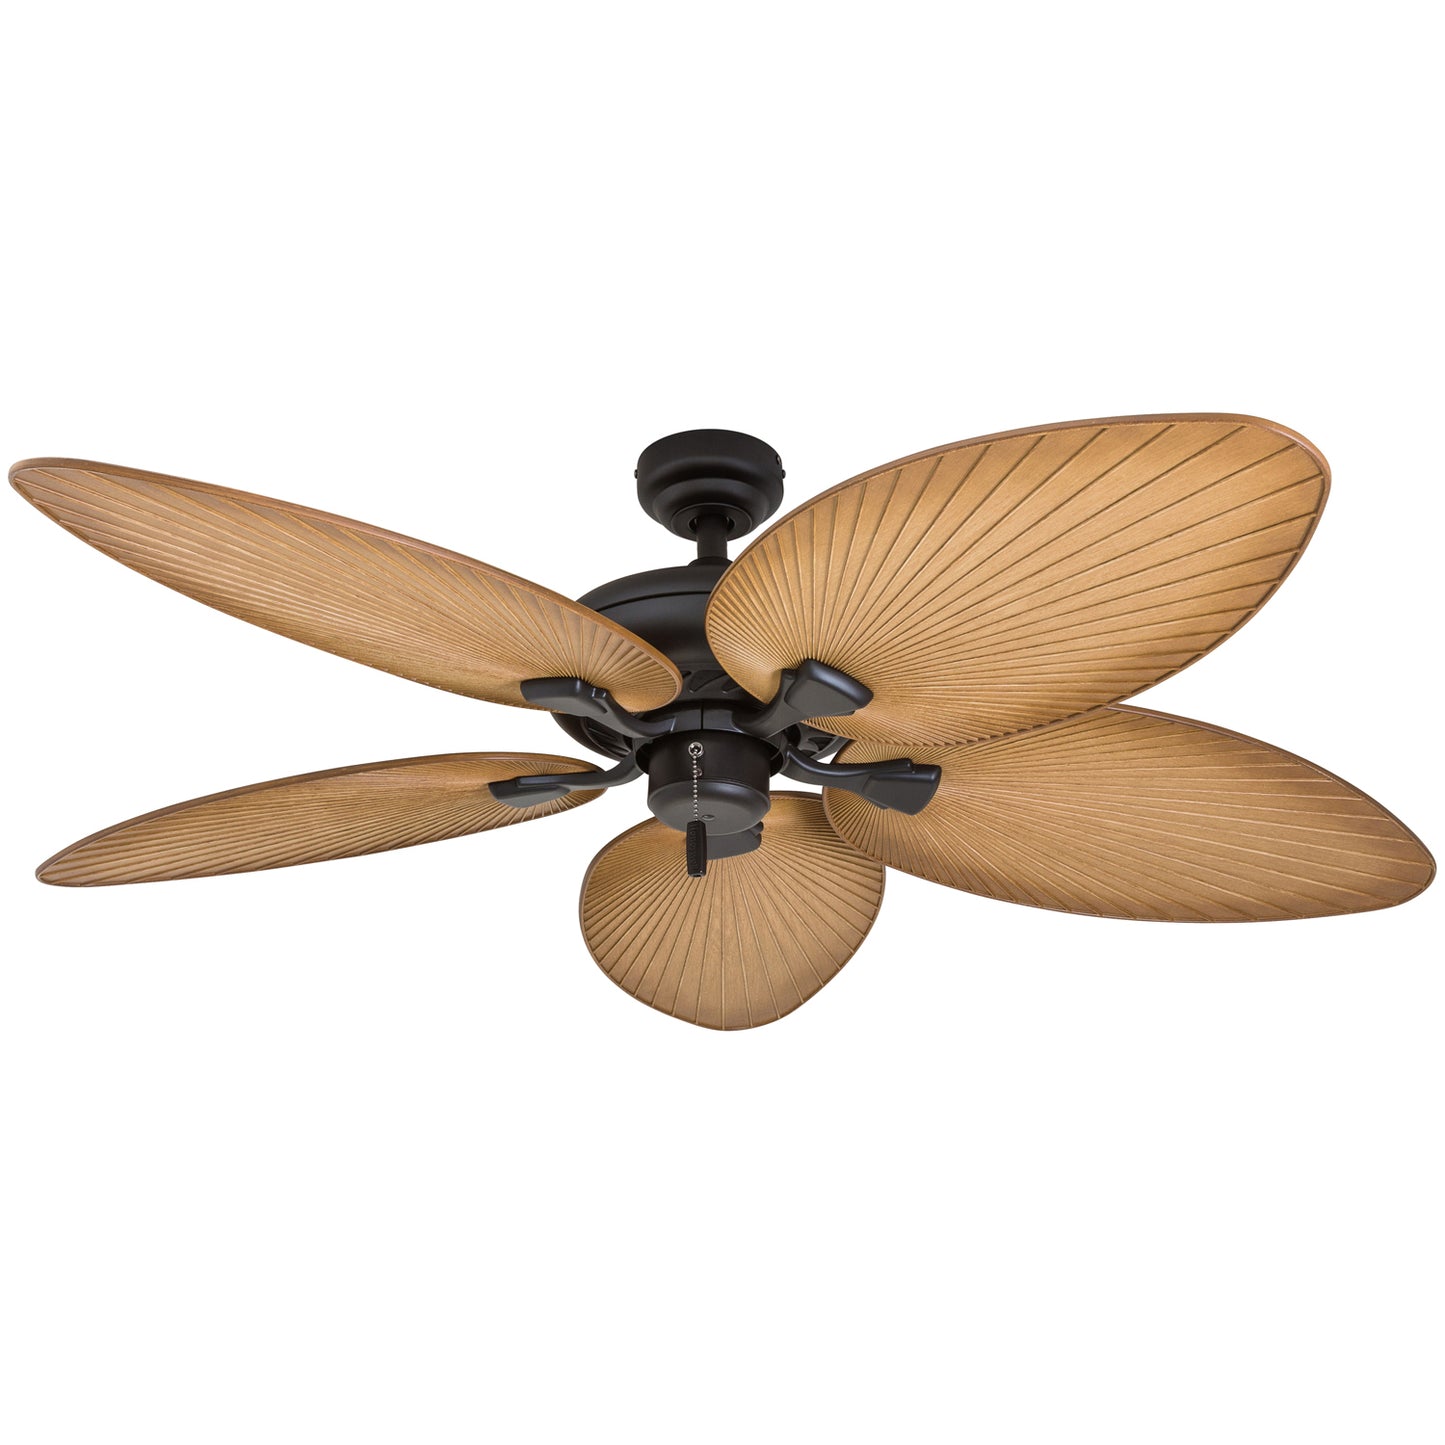 Honeywell Palm Valley Bronze Tropical Ceiling Fan with Palm Leaf Blades - 52-inch